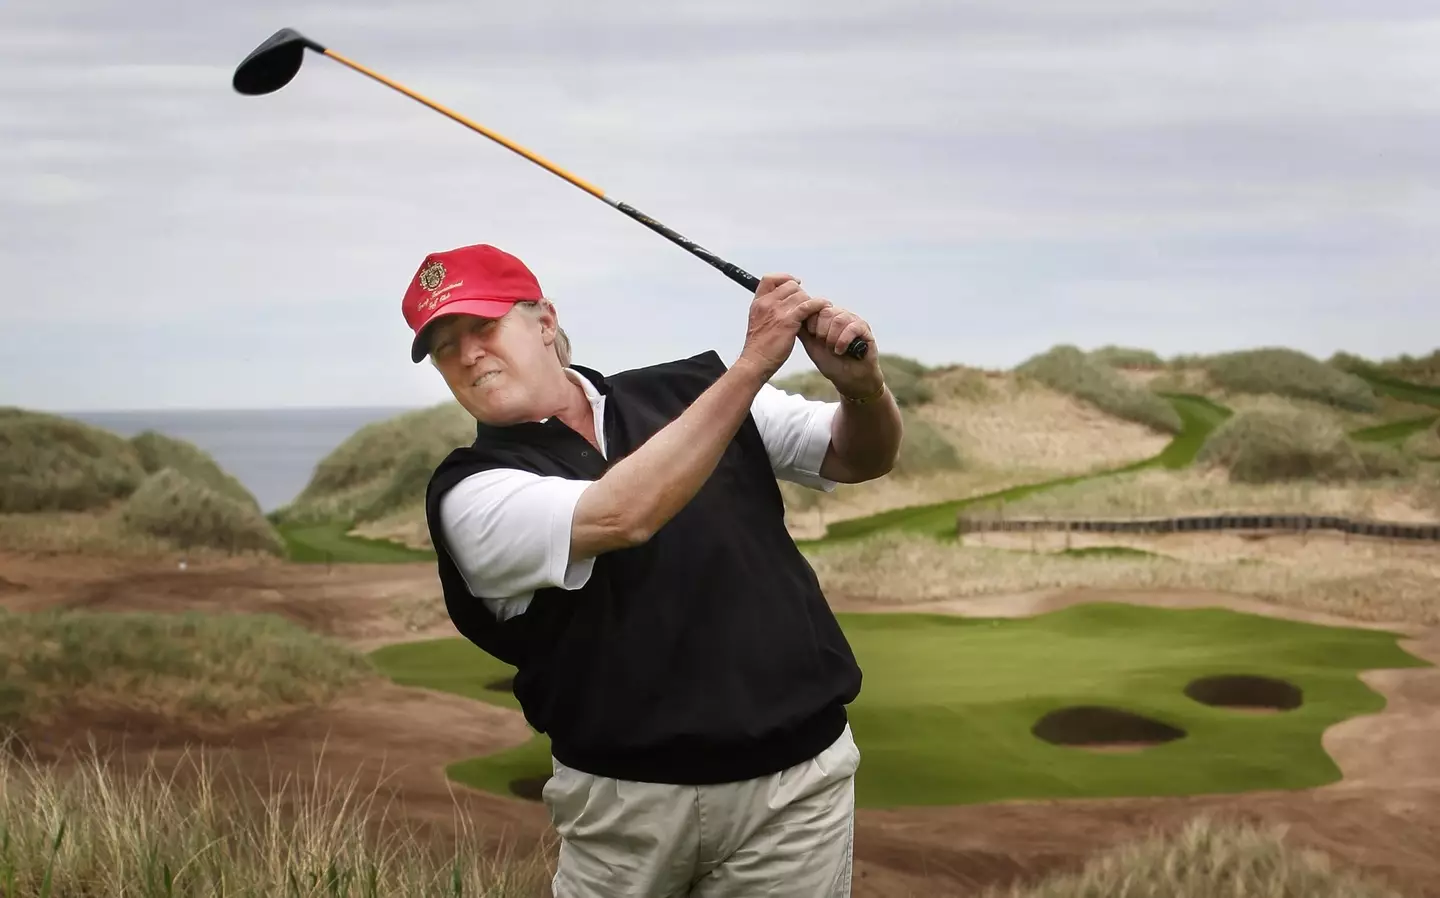 Donald Trump made the comments when pressed about his golf club.